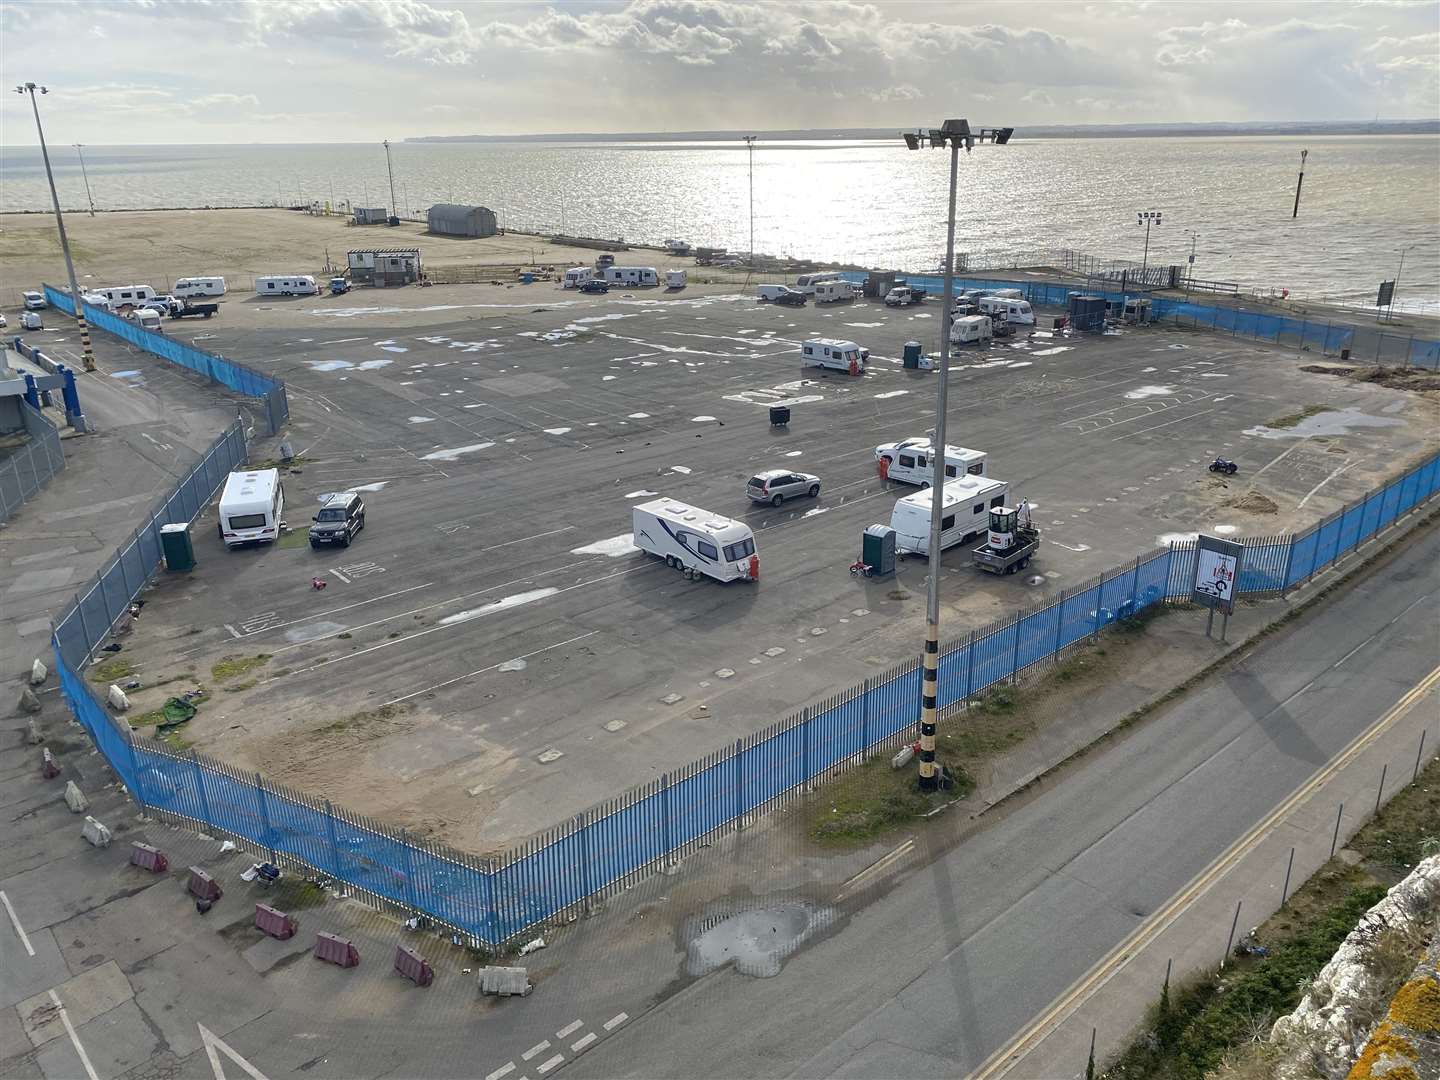 The site by the Port of Ramsgate where the Pavee traveller families have been since last May